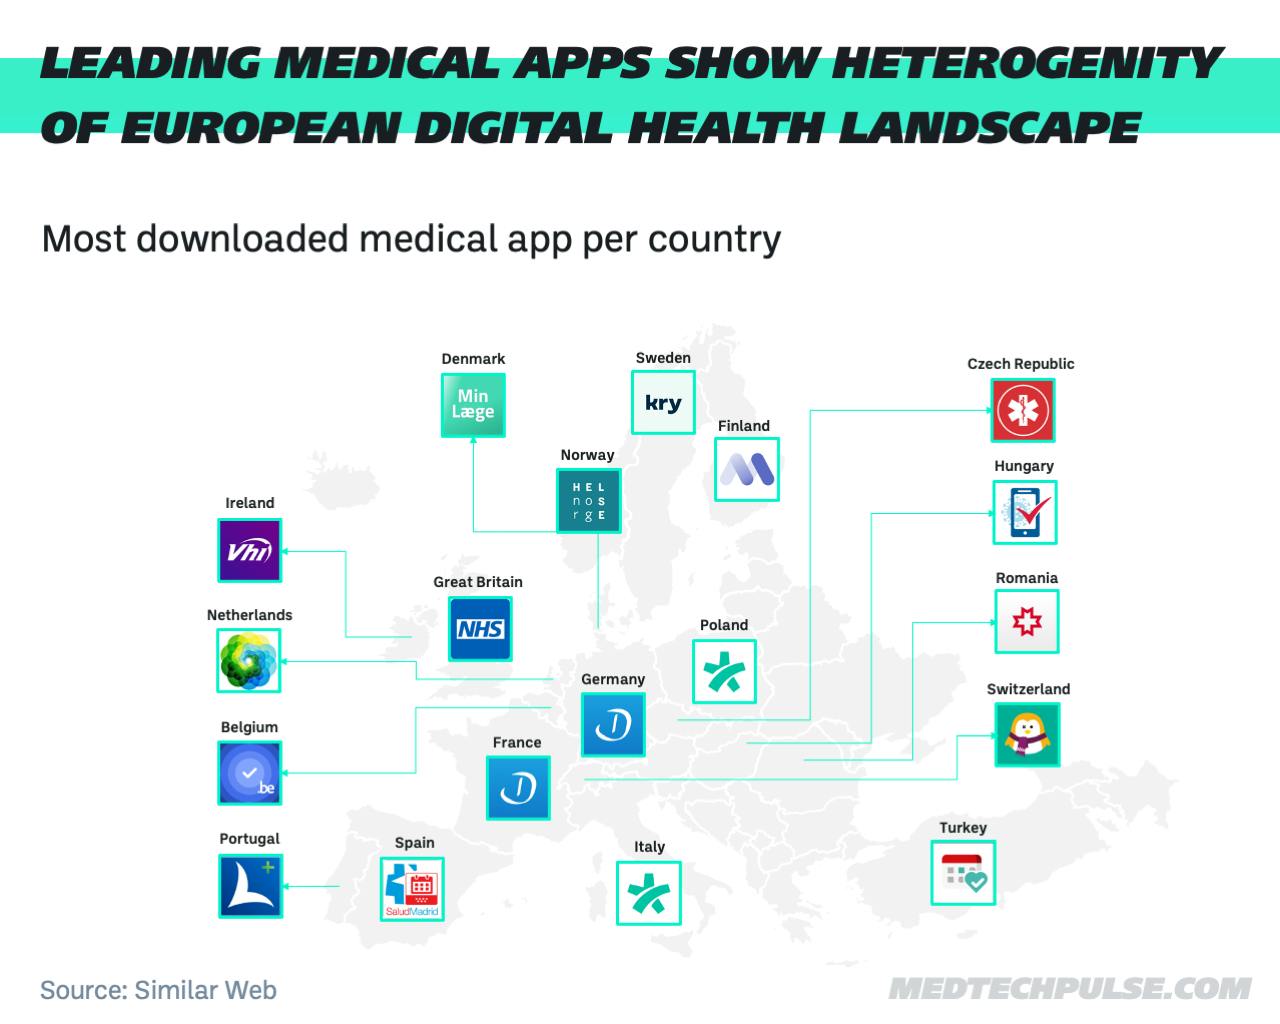 Europe's doctor apps, compared